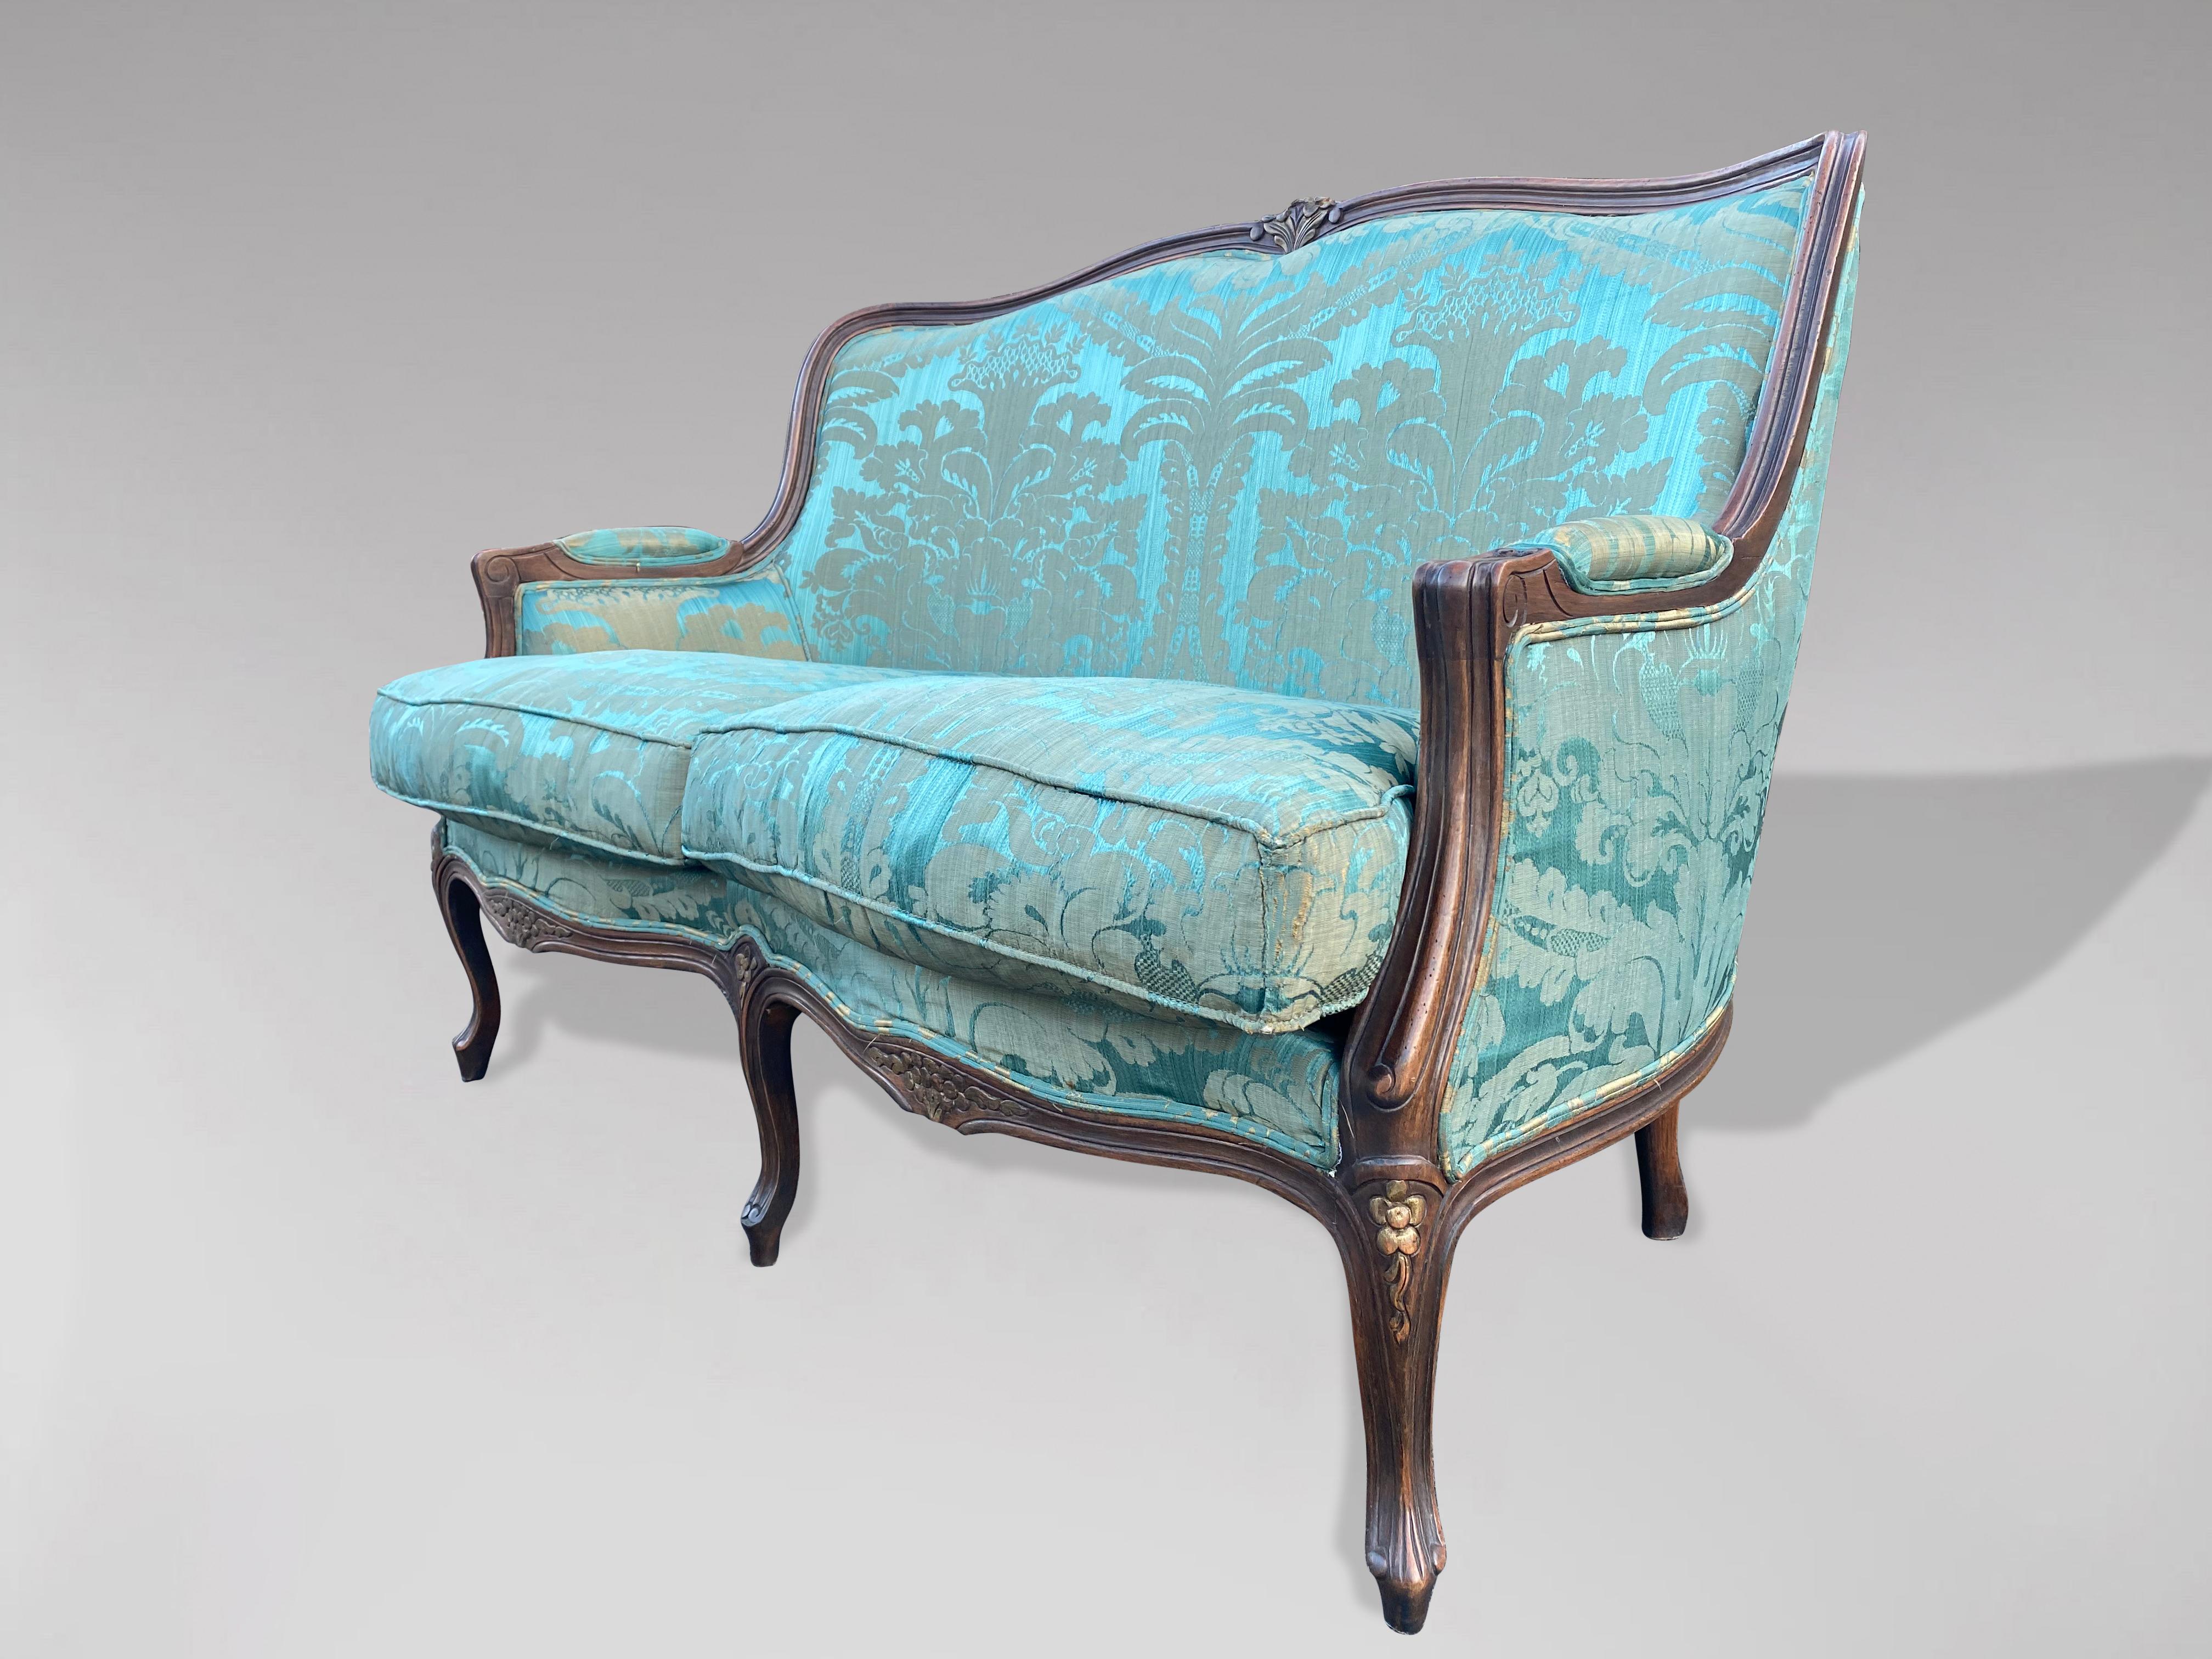 late 19th century furniture styles